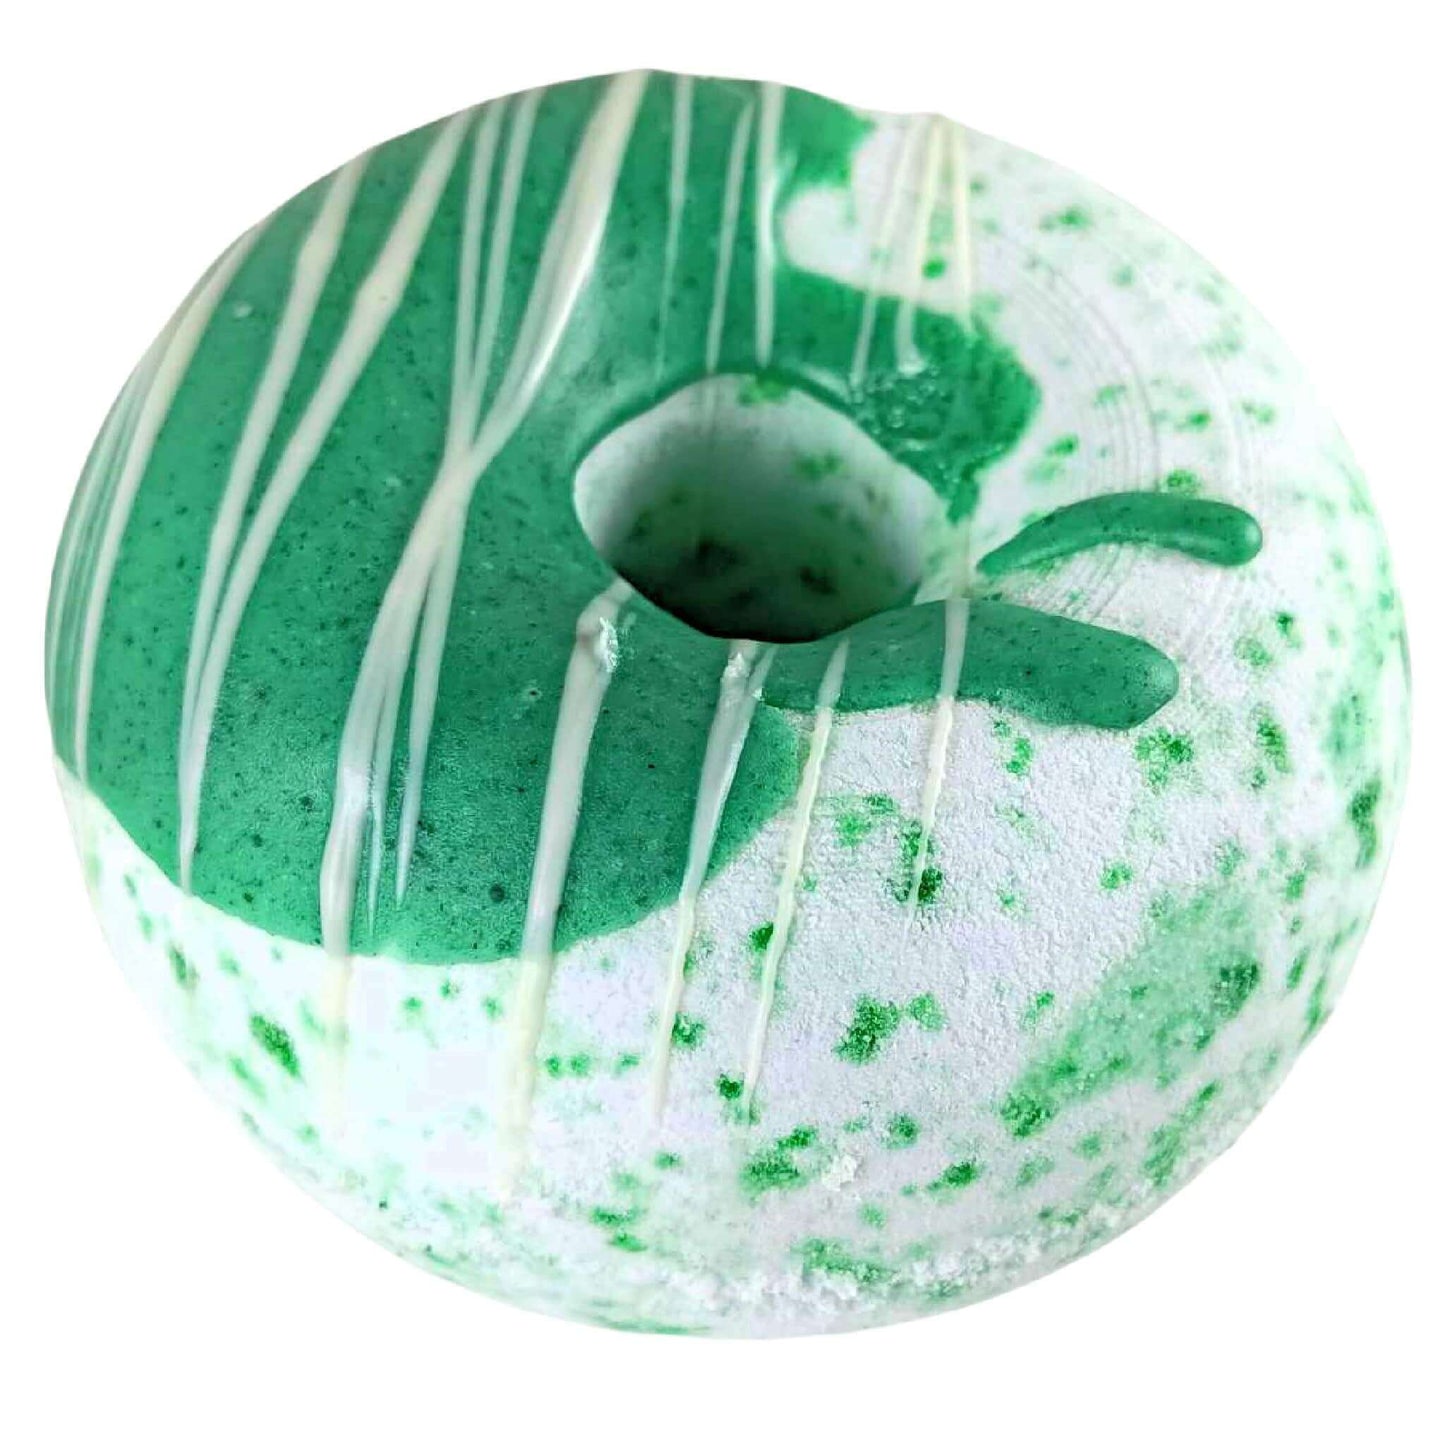 Experience the bliss of a spa at home with our Sacred Oasis Donut Bath Bomb. Indulge yourself today!